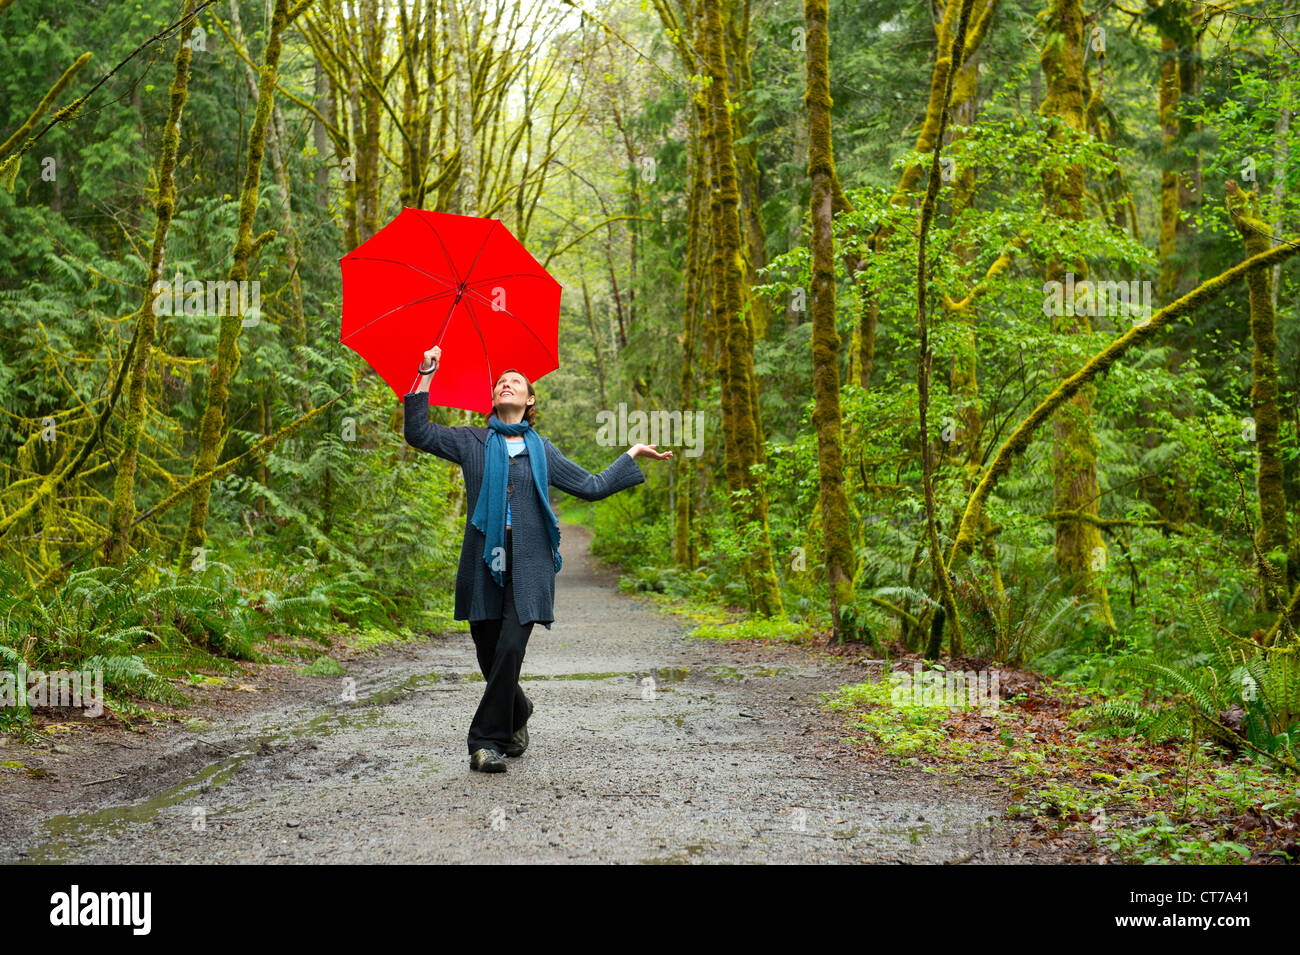 Woman on forest path with red umbrella Stock Photo